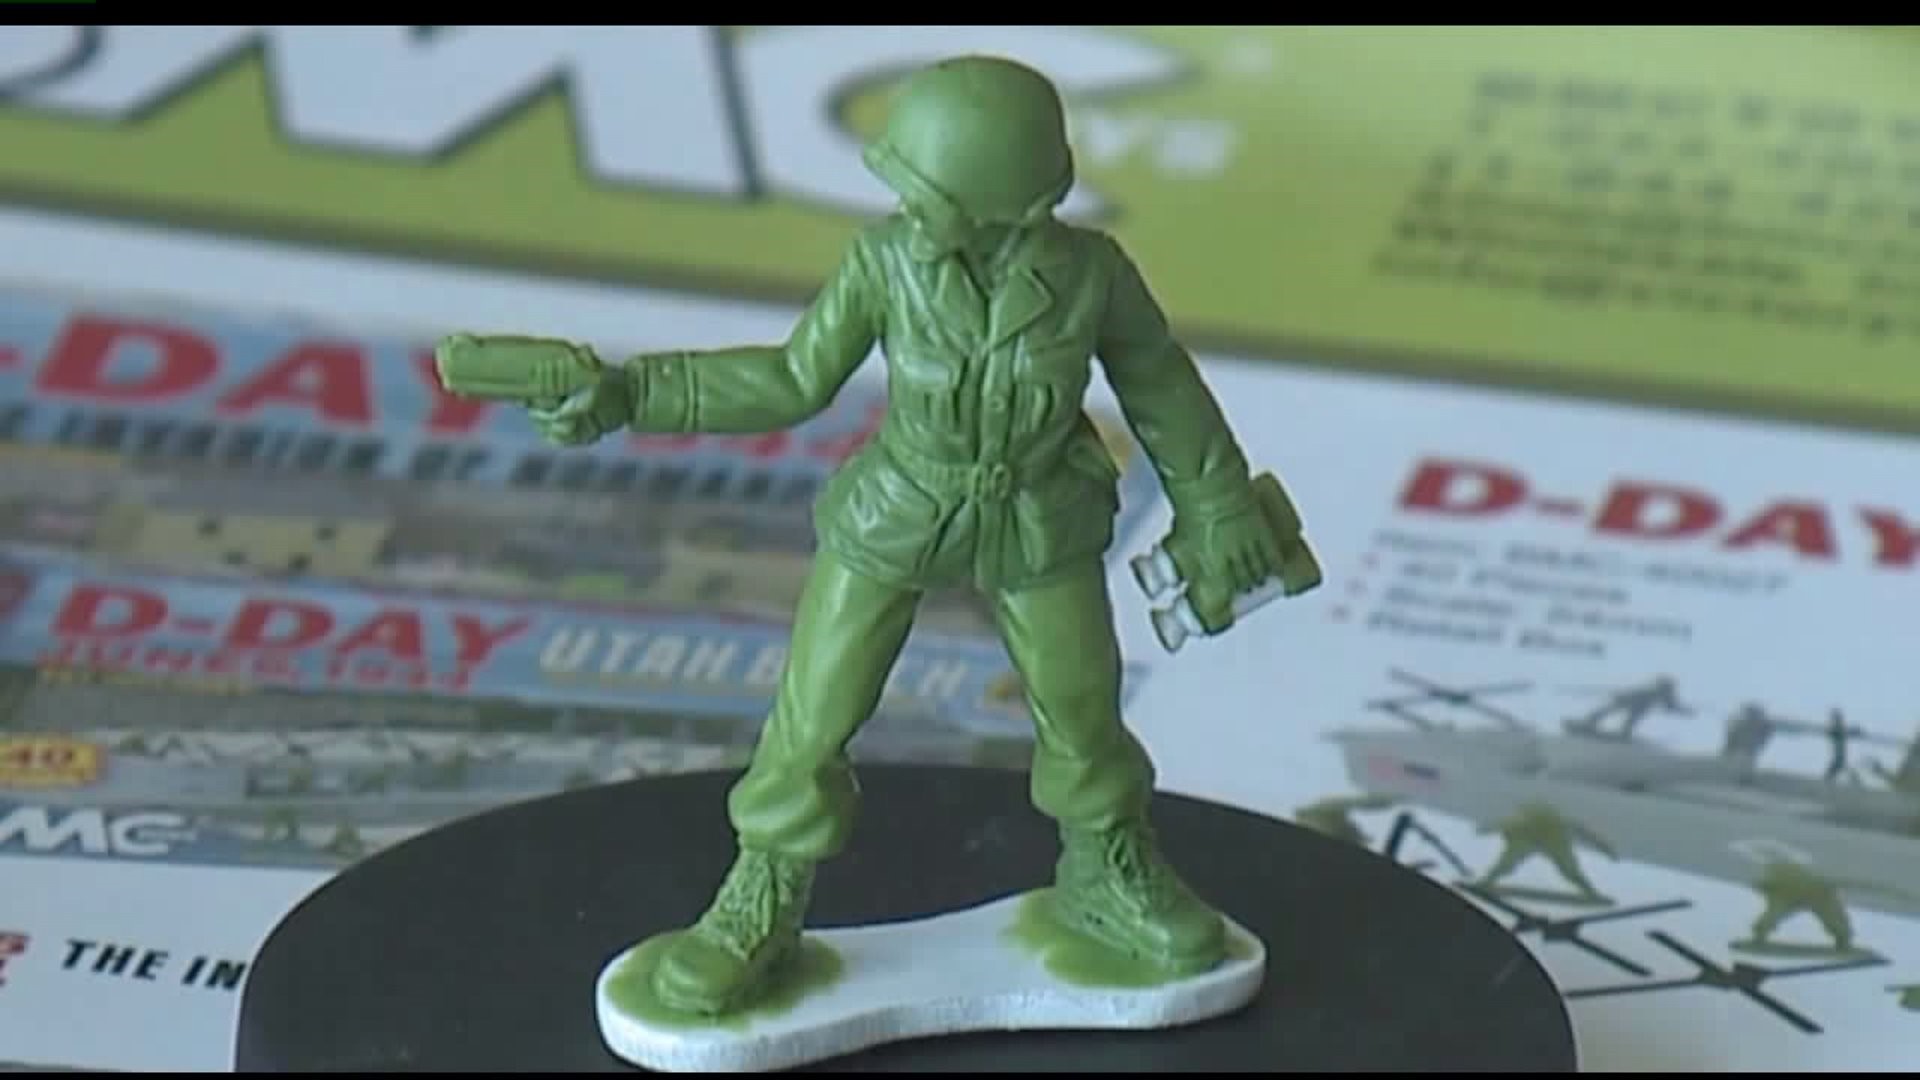 There`s a new toy soldier in town